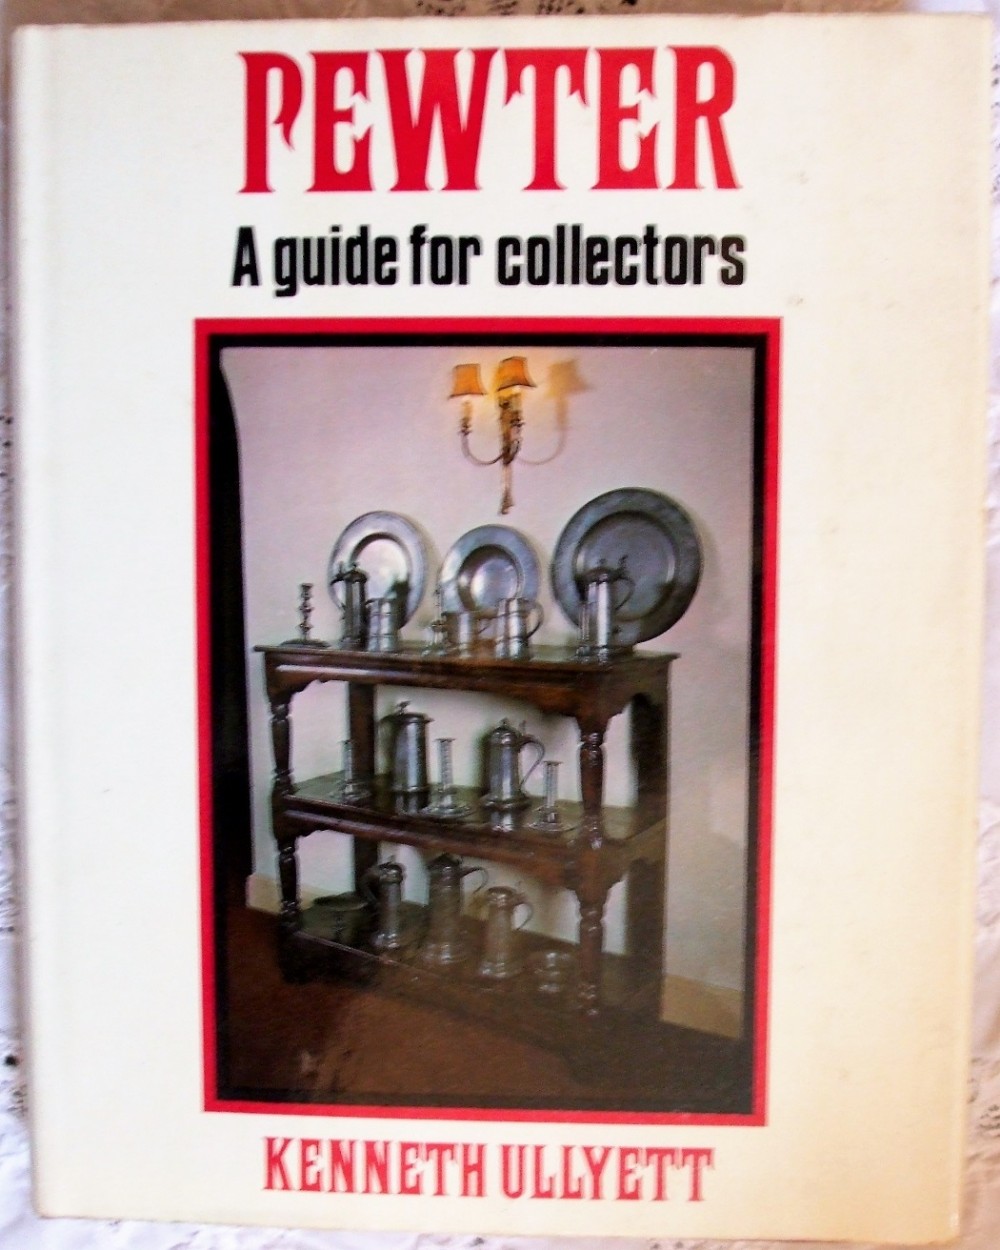 pewter a guide for collectors kenneth ullyett